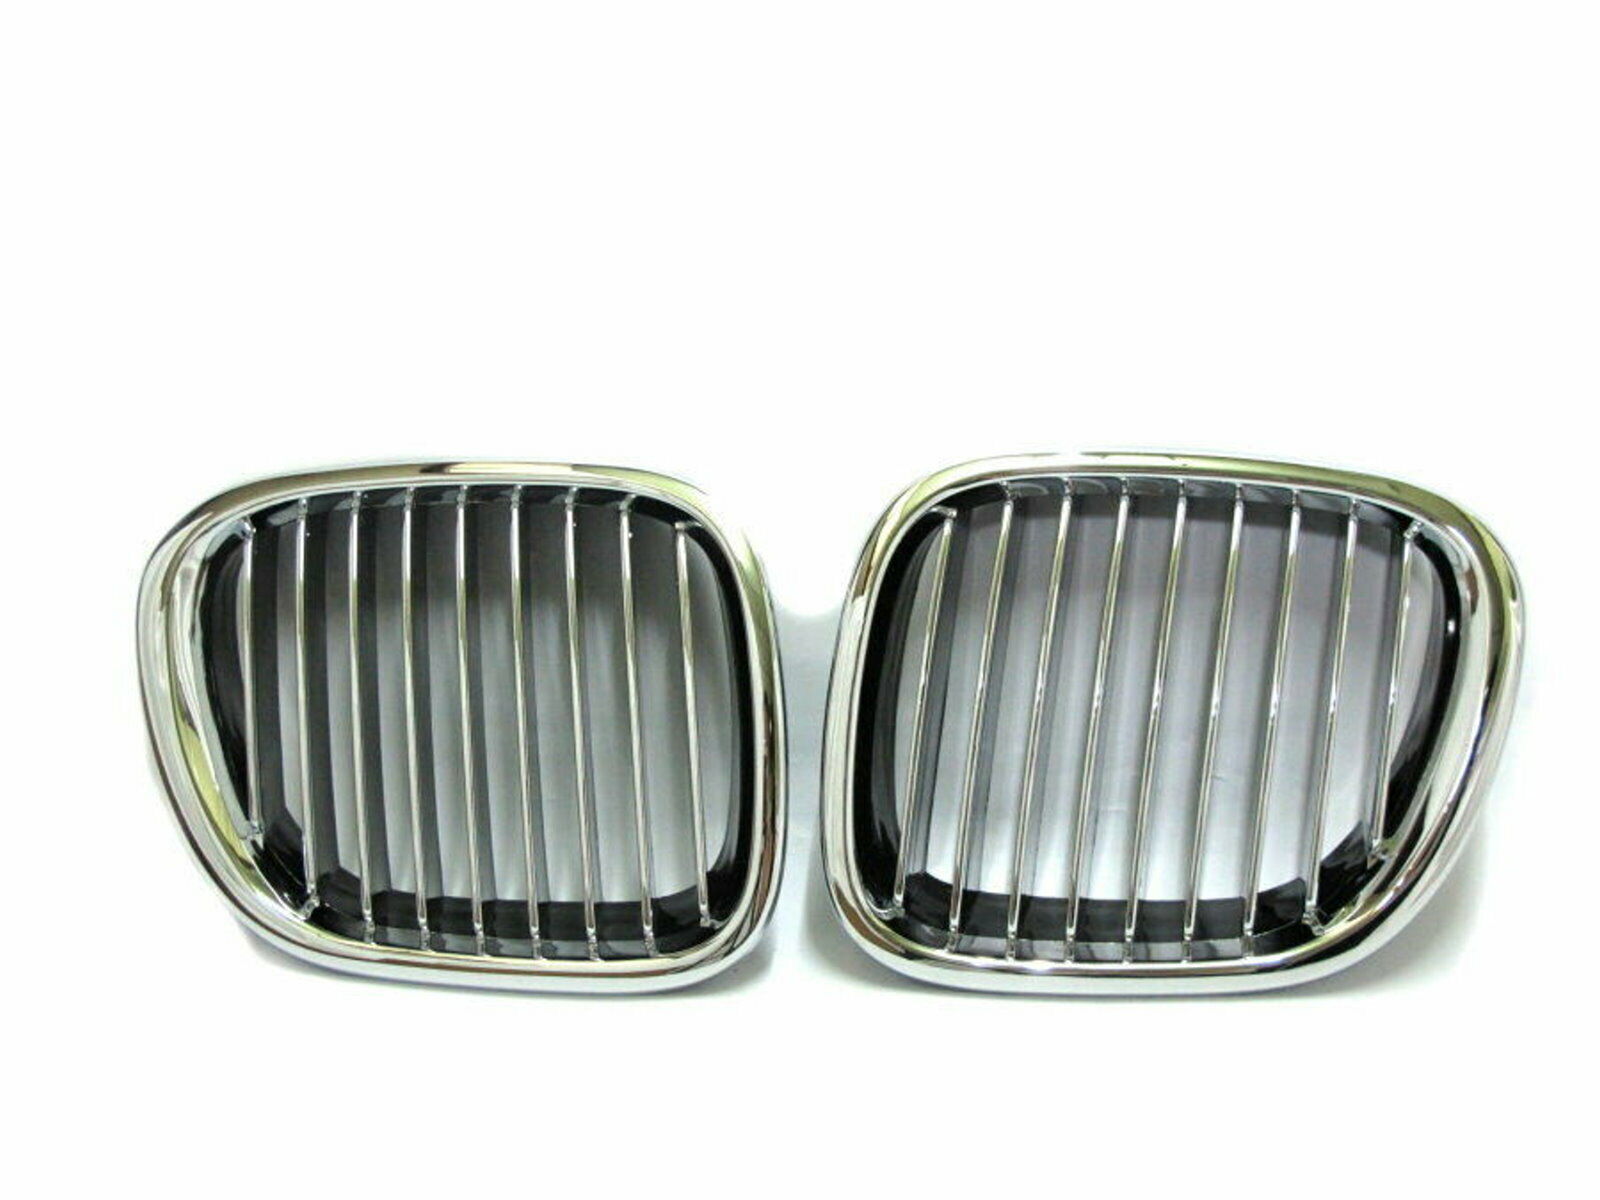 Z-Series Z3 E36 1996-2002 Coupe/Roadster 2D GRILLE/GRILL Chrome/Black for BMW